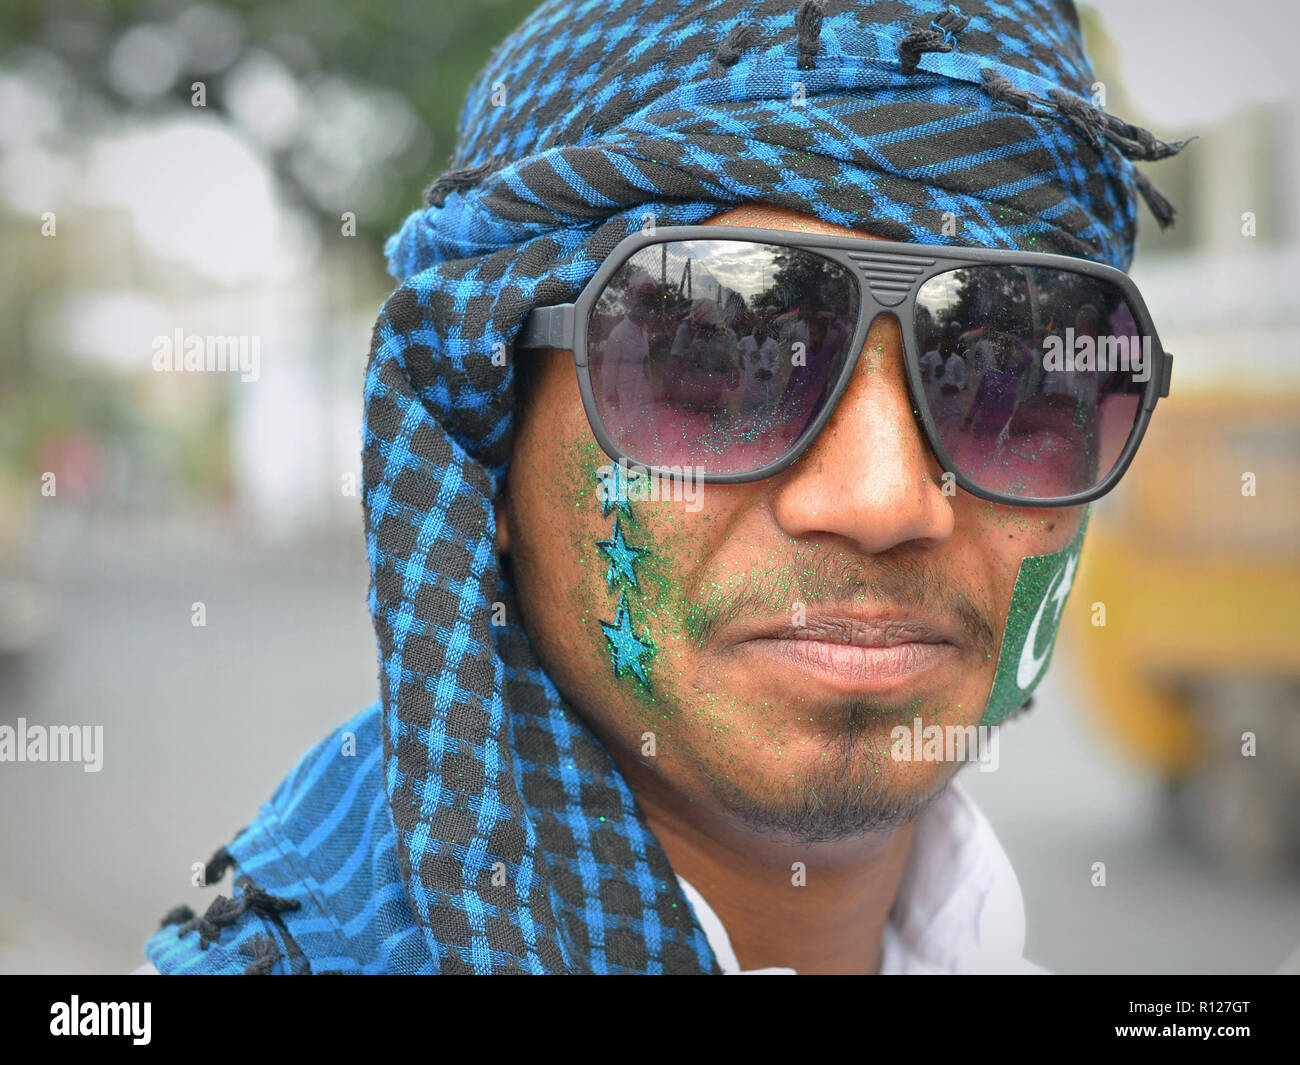 Young Indian Muslim man with green glitter and an Islamic flag sticker on his cheeks wears fancy aviator-style sunglasses and a checkered headscarf. Stock Photo